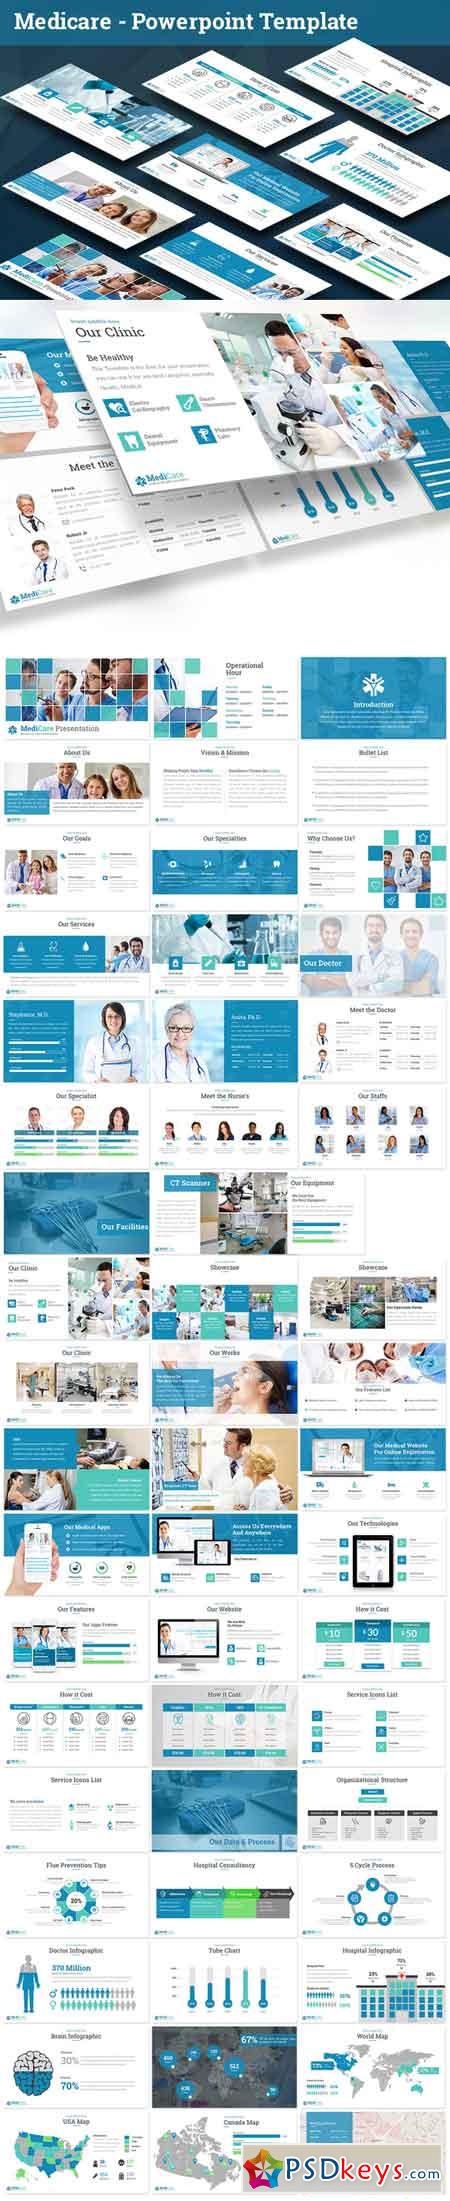 Medicare - Powerpoint Template 715601